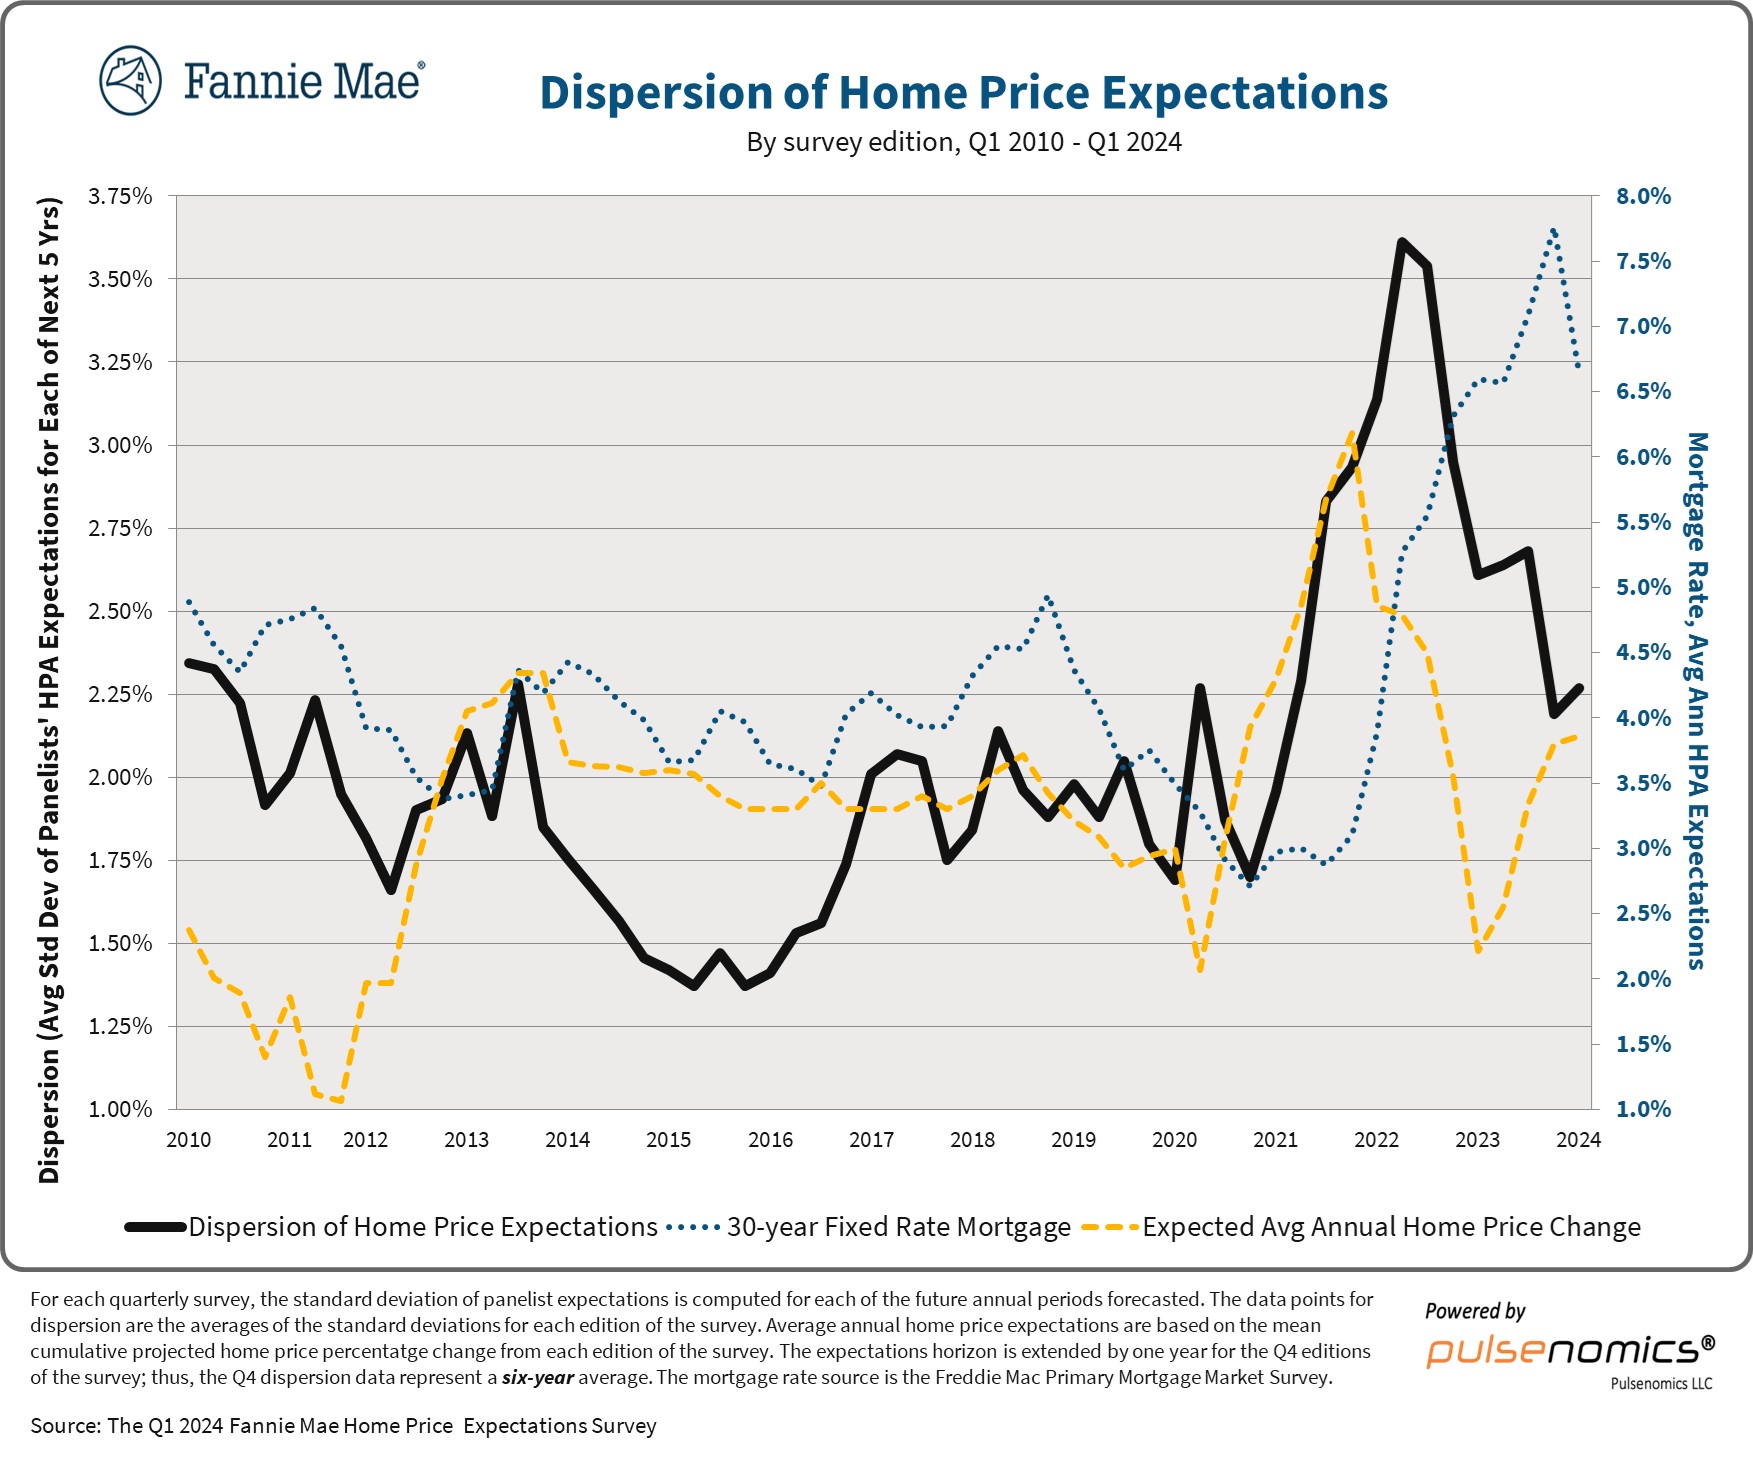 Dispersion of Home Price Expectations